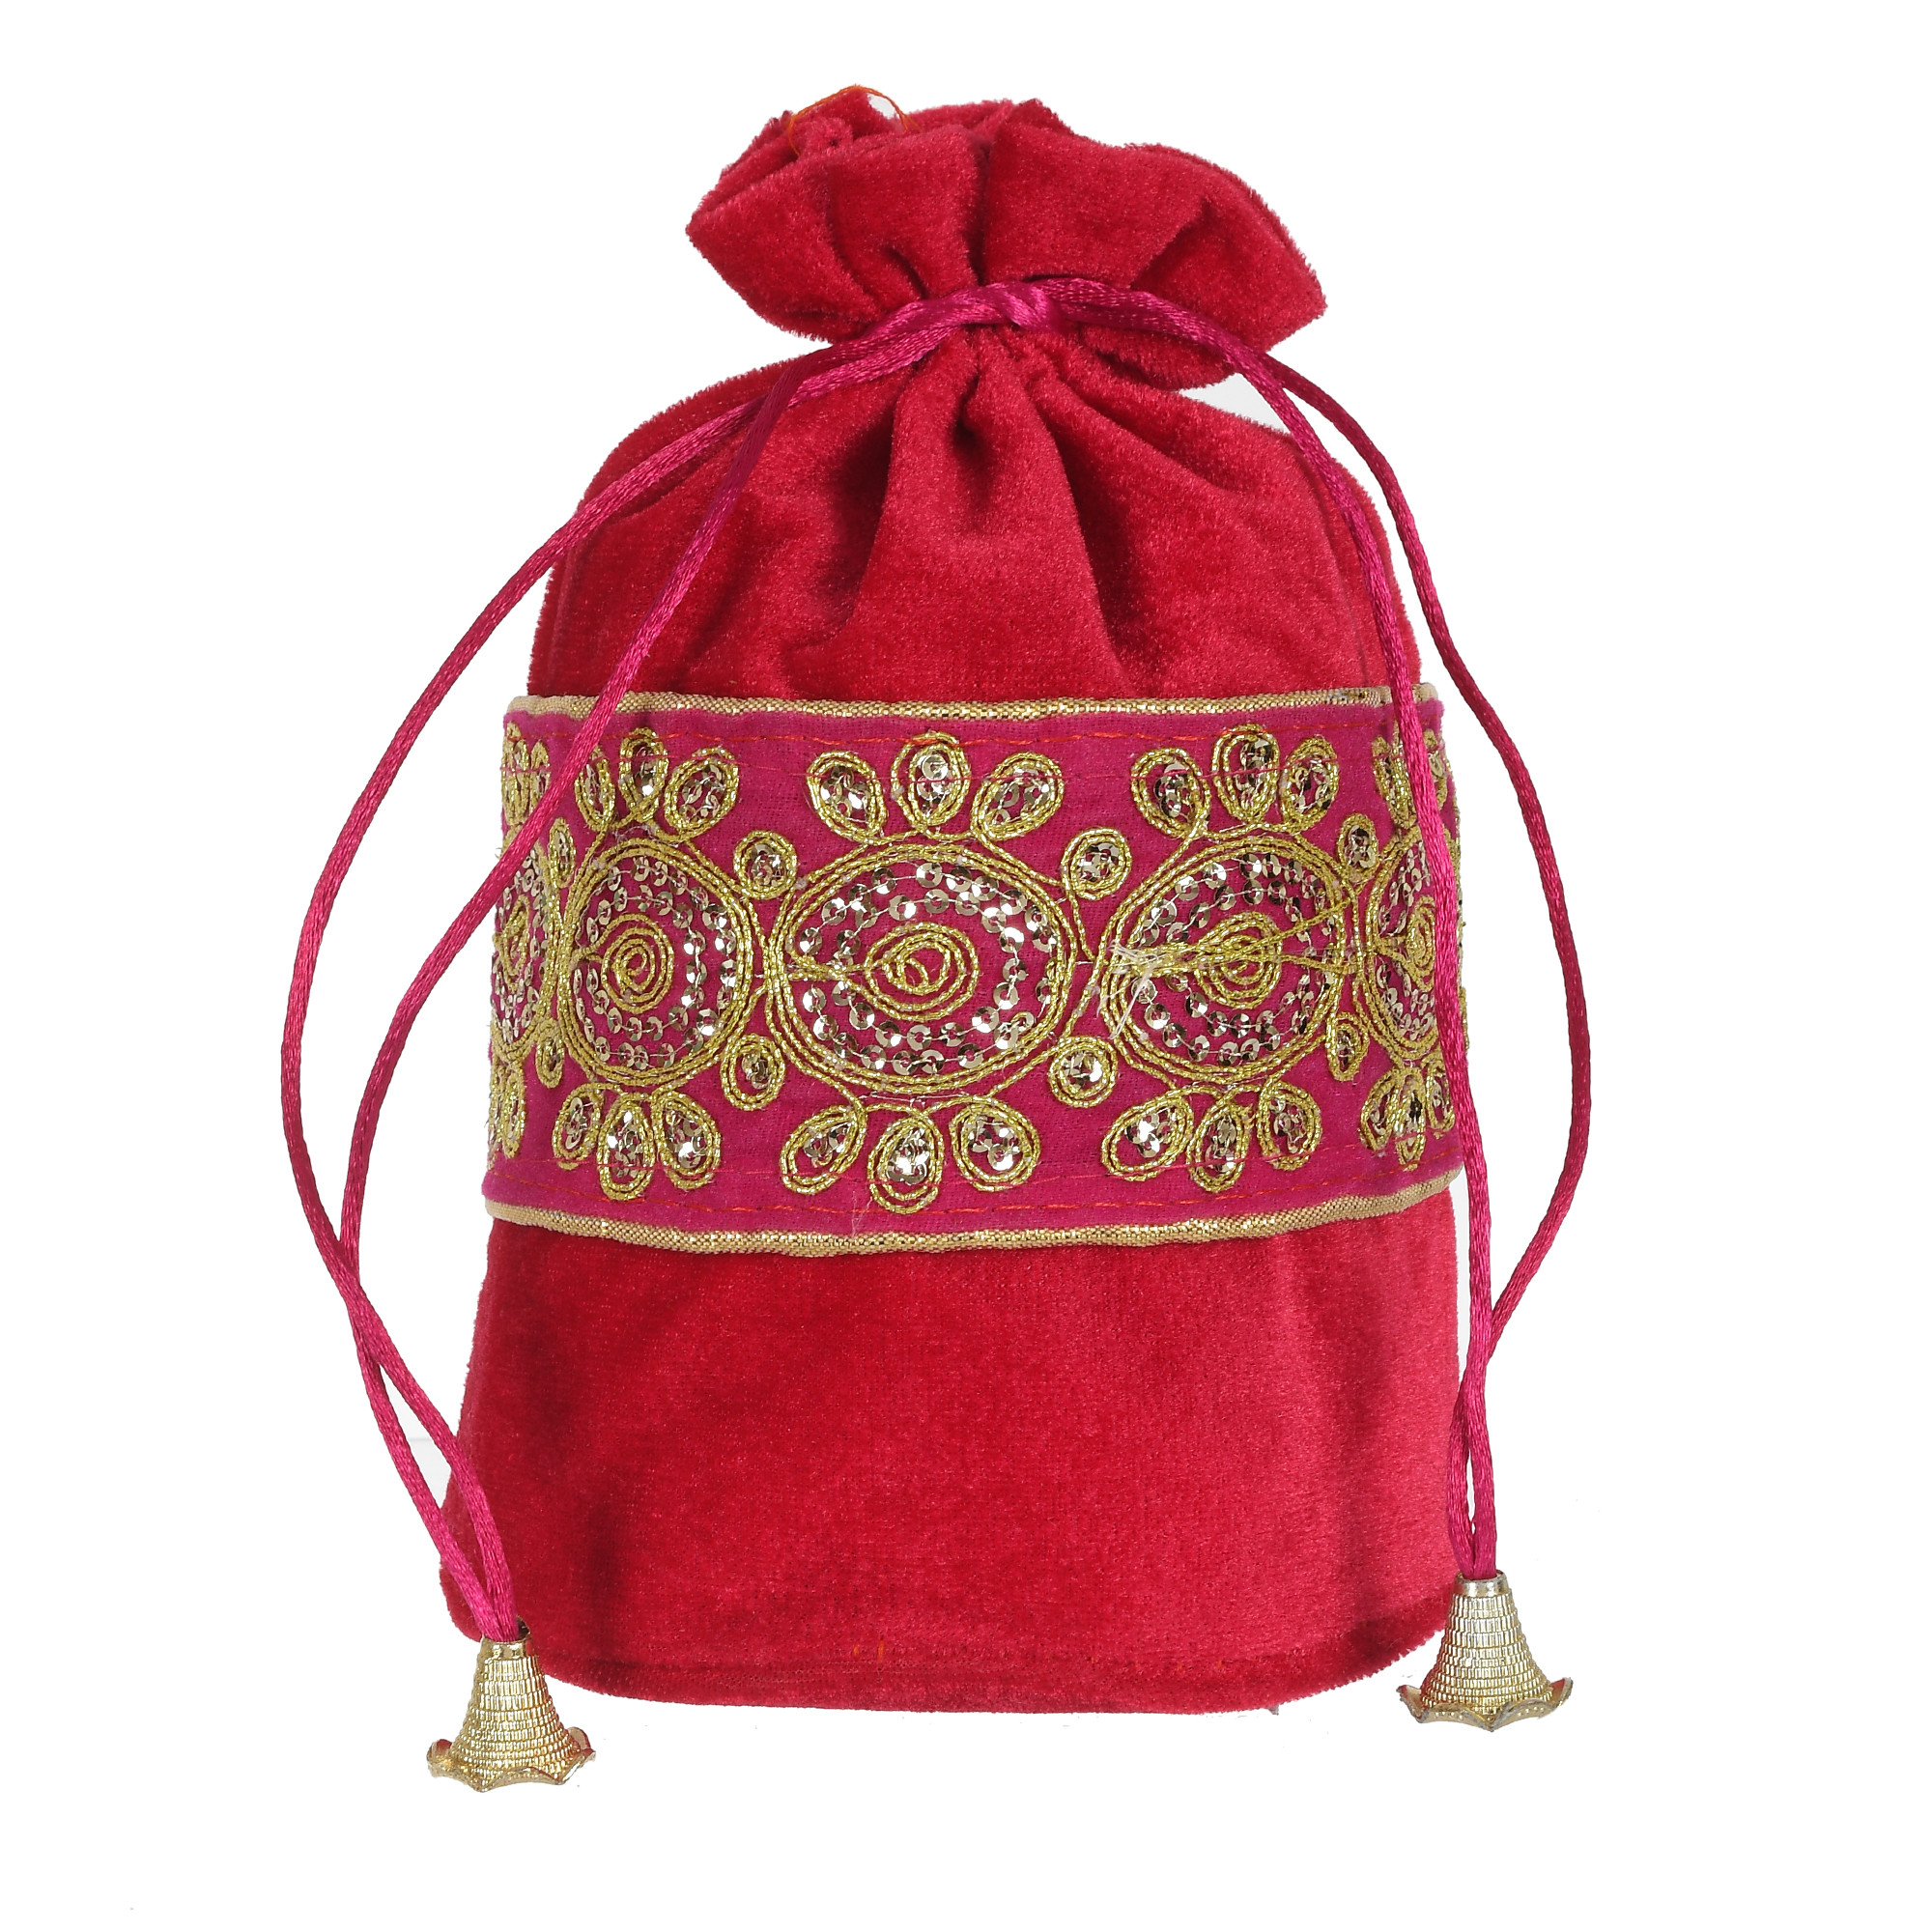 Kuber Industries Embroidered Design Drawstring Potli Bag Party Wedding Favor Gift Jewelry Bags-(Pink & Yellow)